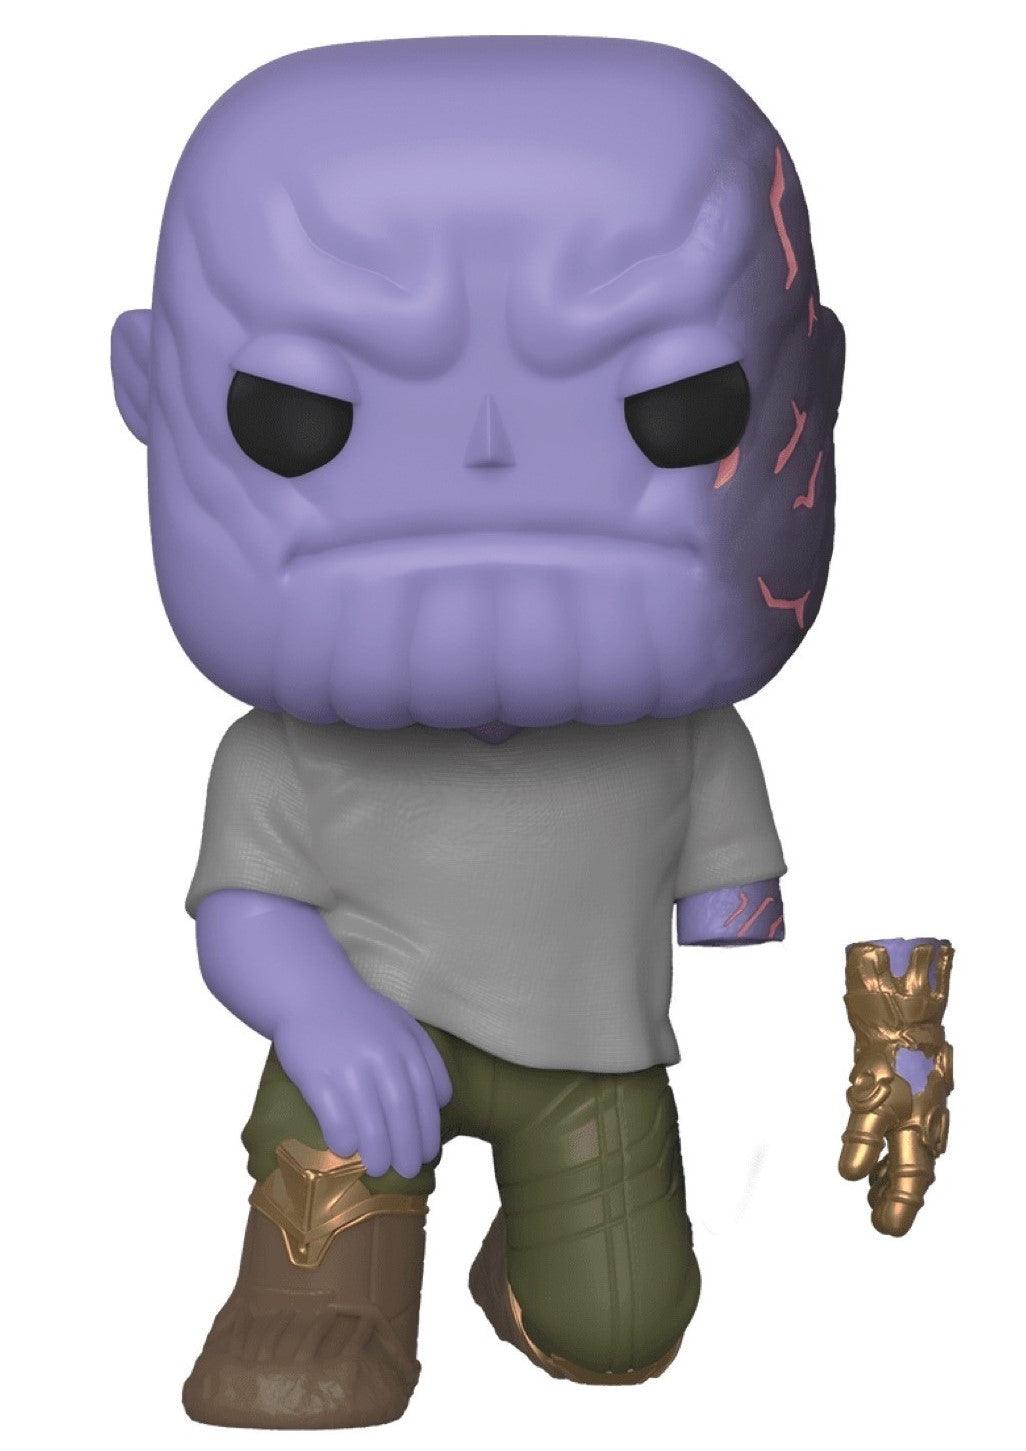 Pop! Marvel - Avengers: Endgame - Thanos - #592 - 2020 Emerald City Comic Con EXCLUSIVE LIMITED Edition - Hobby Champion Inc